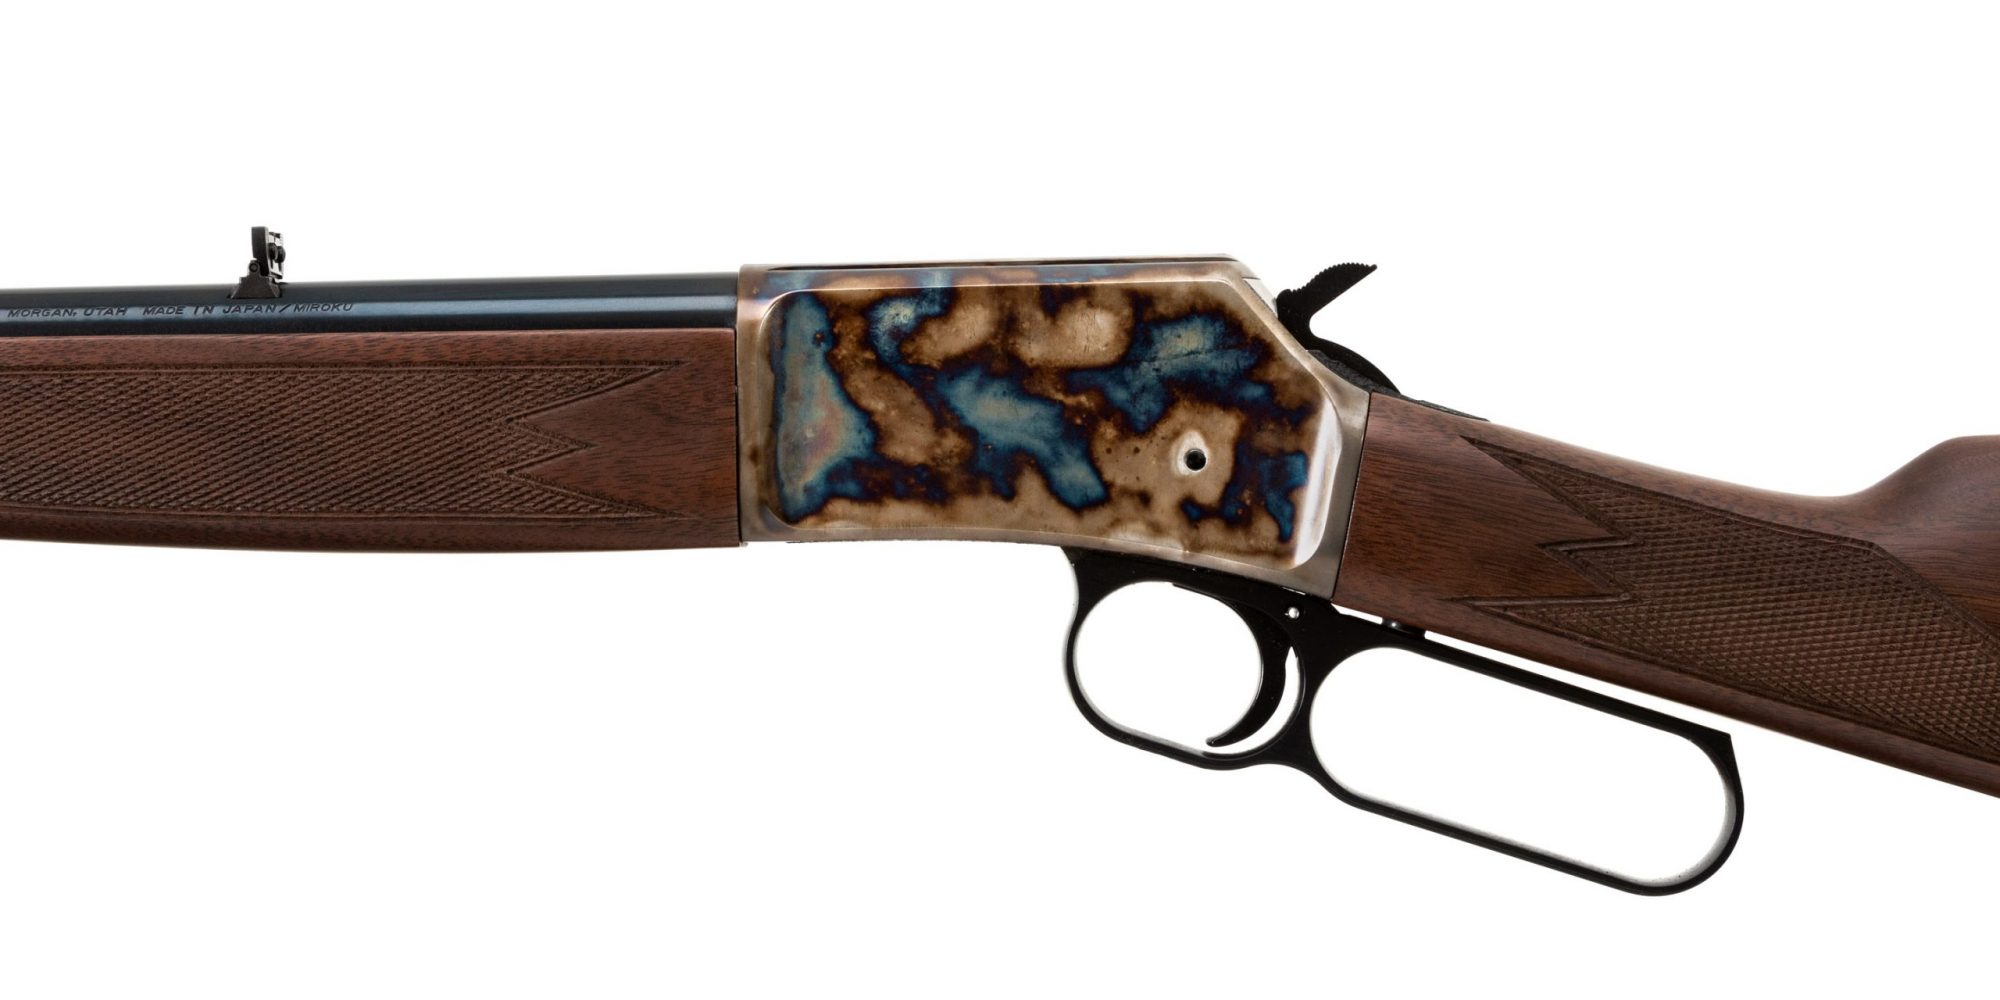 Photo of a Turnbull finished Browning BL-22 with upgraded walnut stocks, featuring bone charcoal color case hardening by Turnbull Restoration of Bloomfield, NY